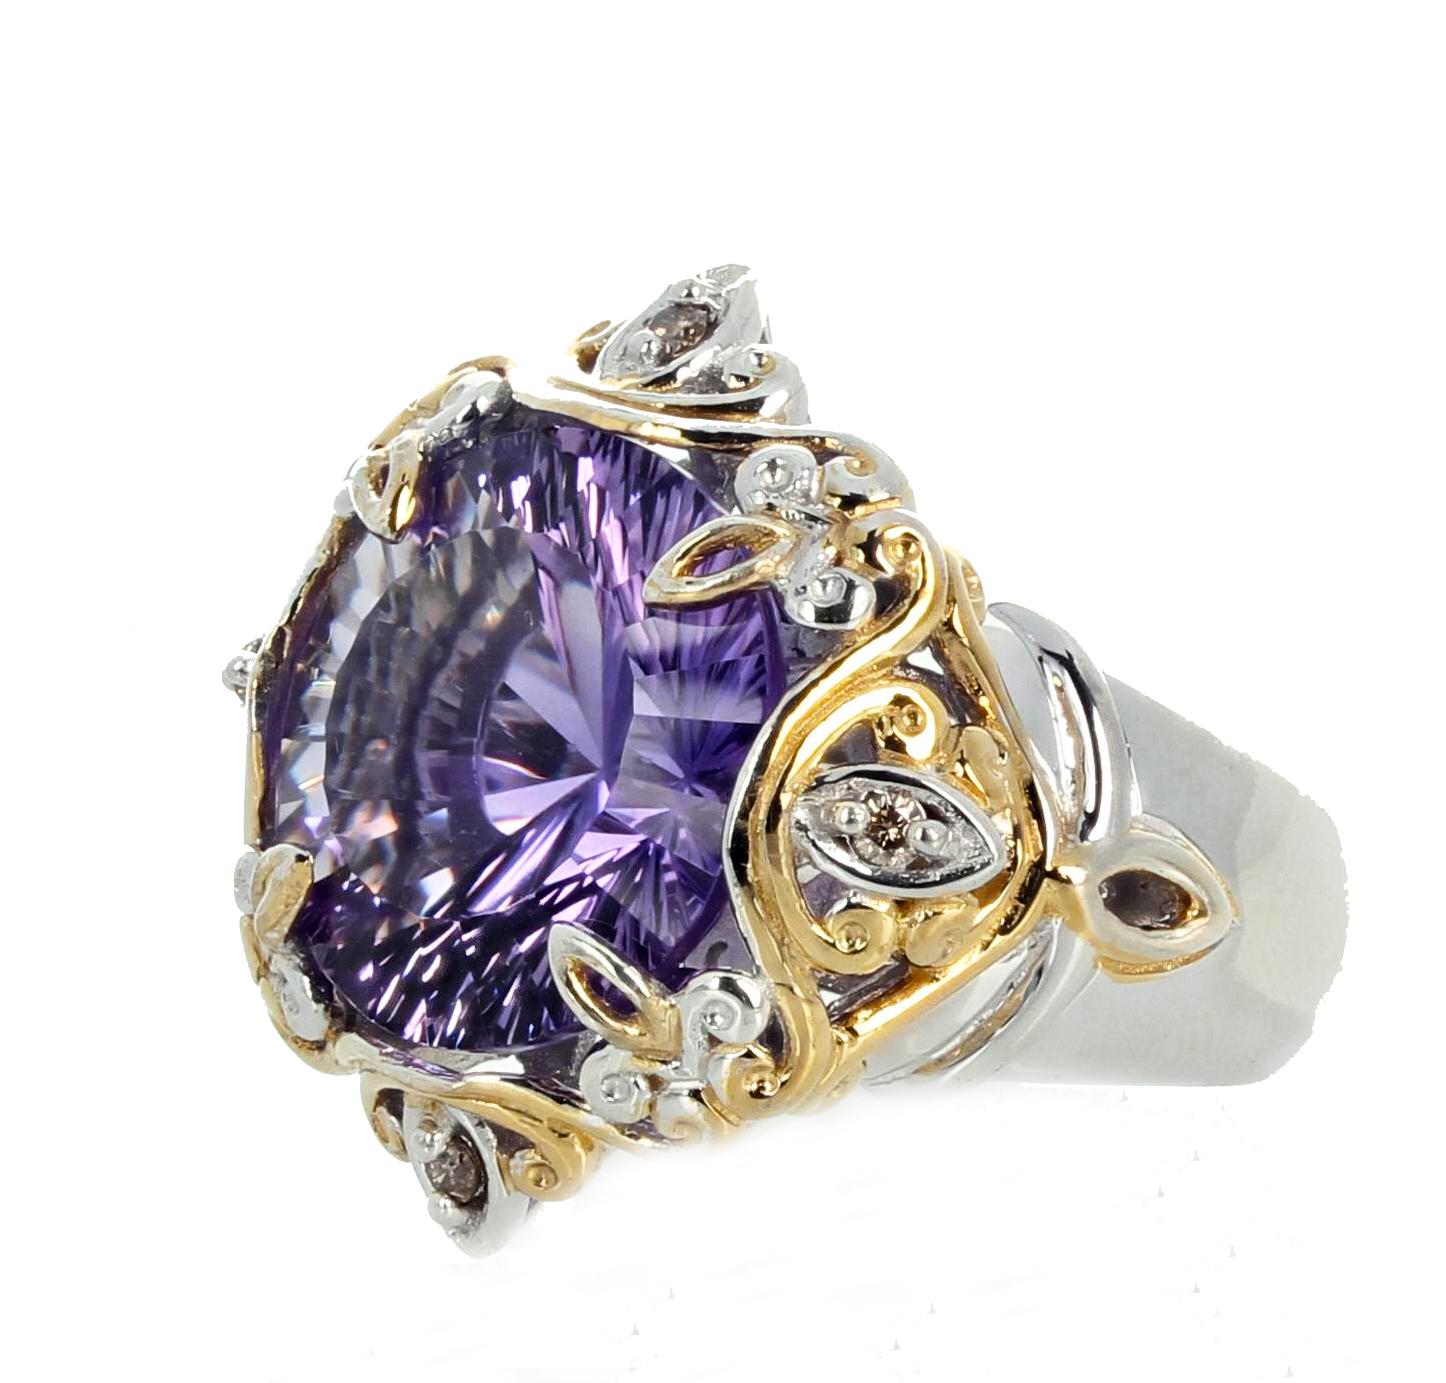 AJD Famous Fantasy Cut 8.9Ct. Natural Amethyst Sterling Silver & Goldy Ring For Sale 1